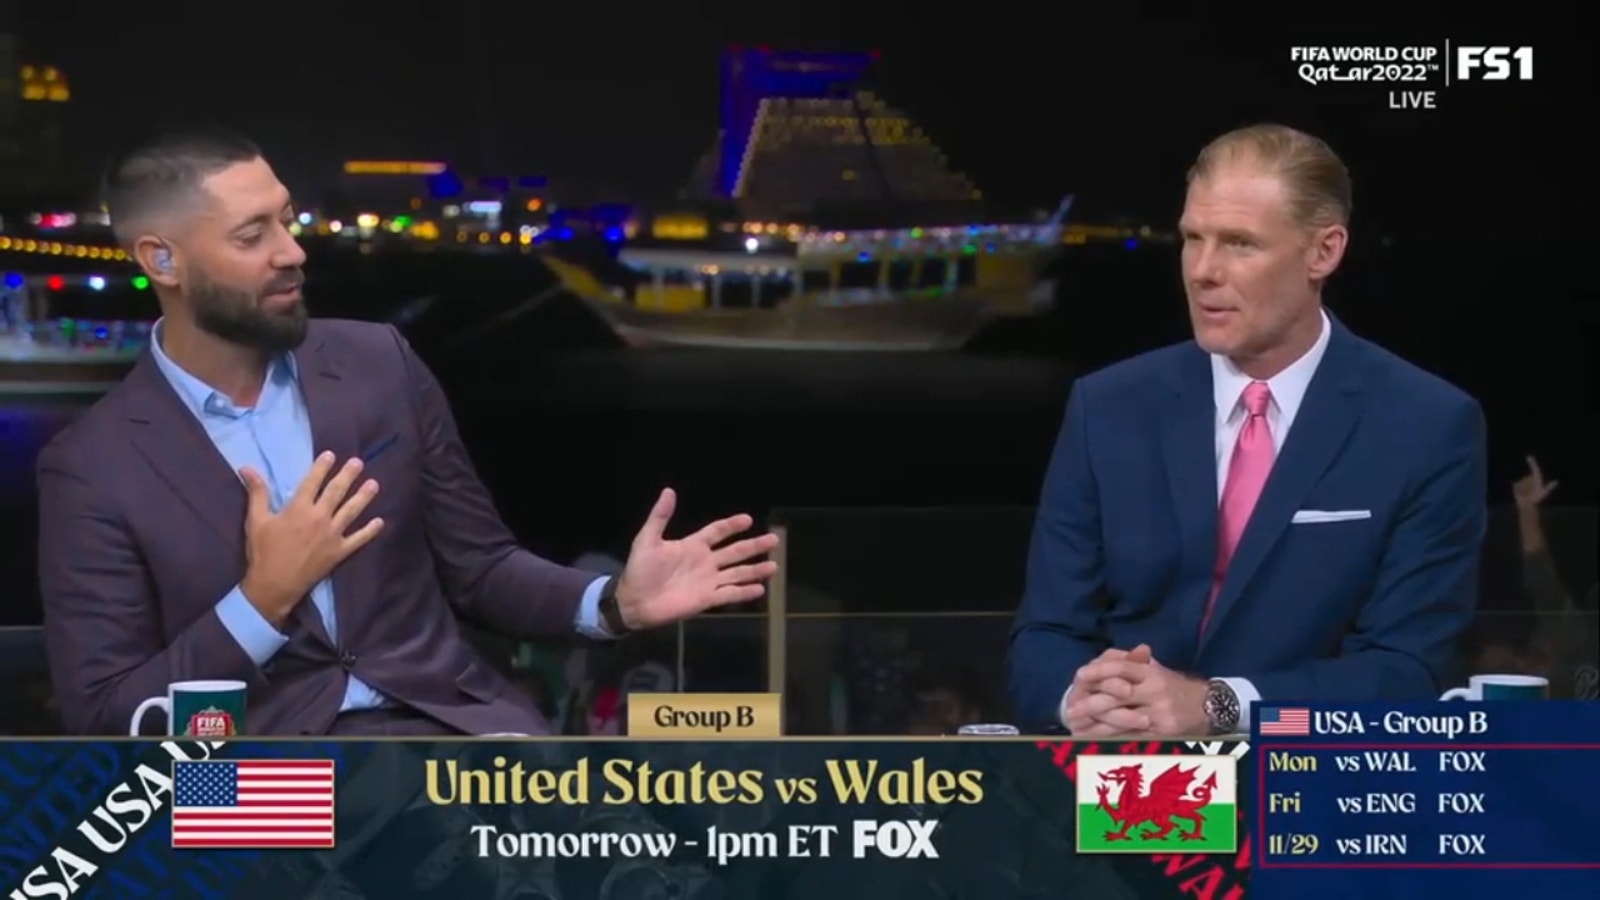 Wales-U.S. preview